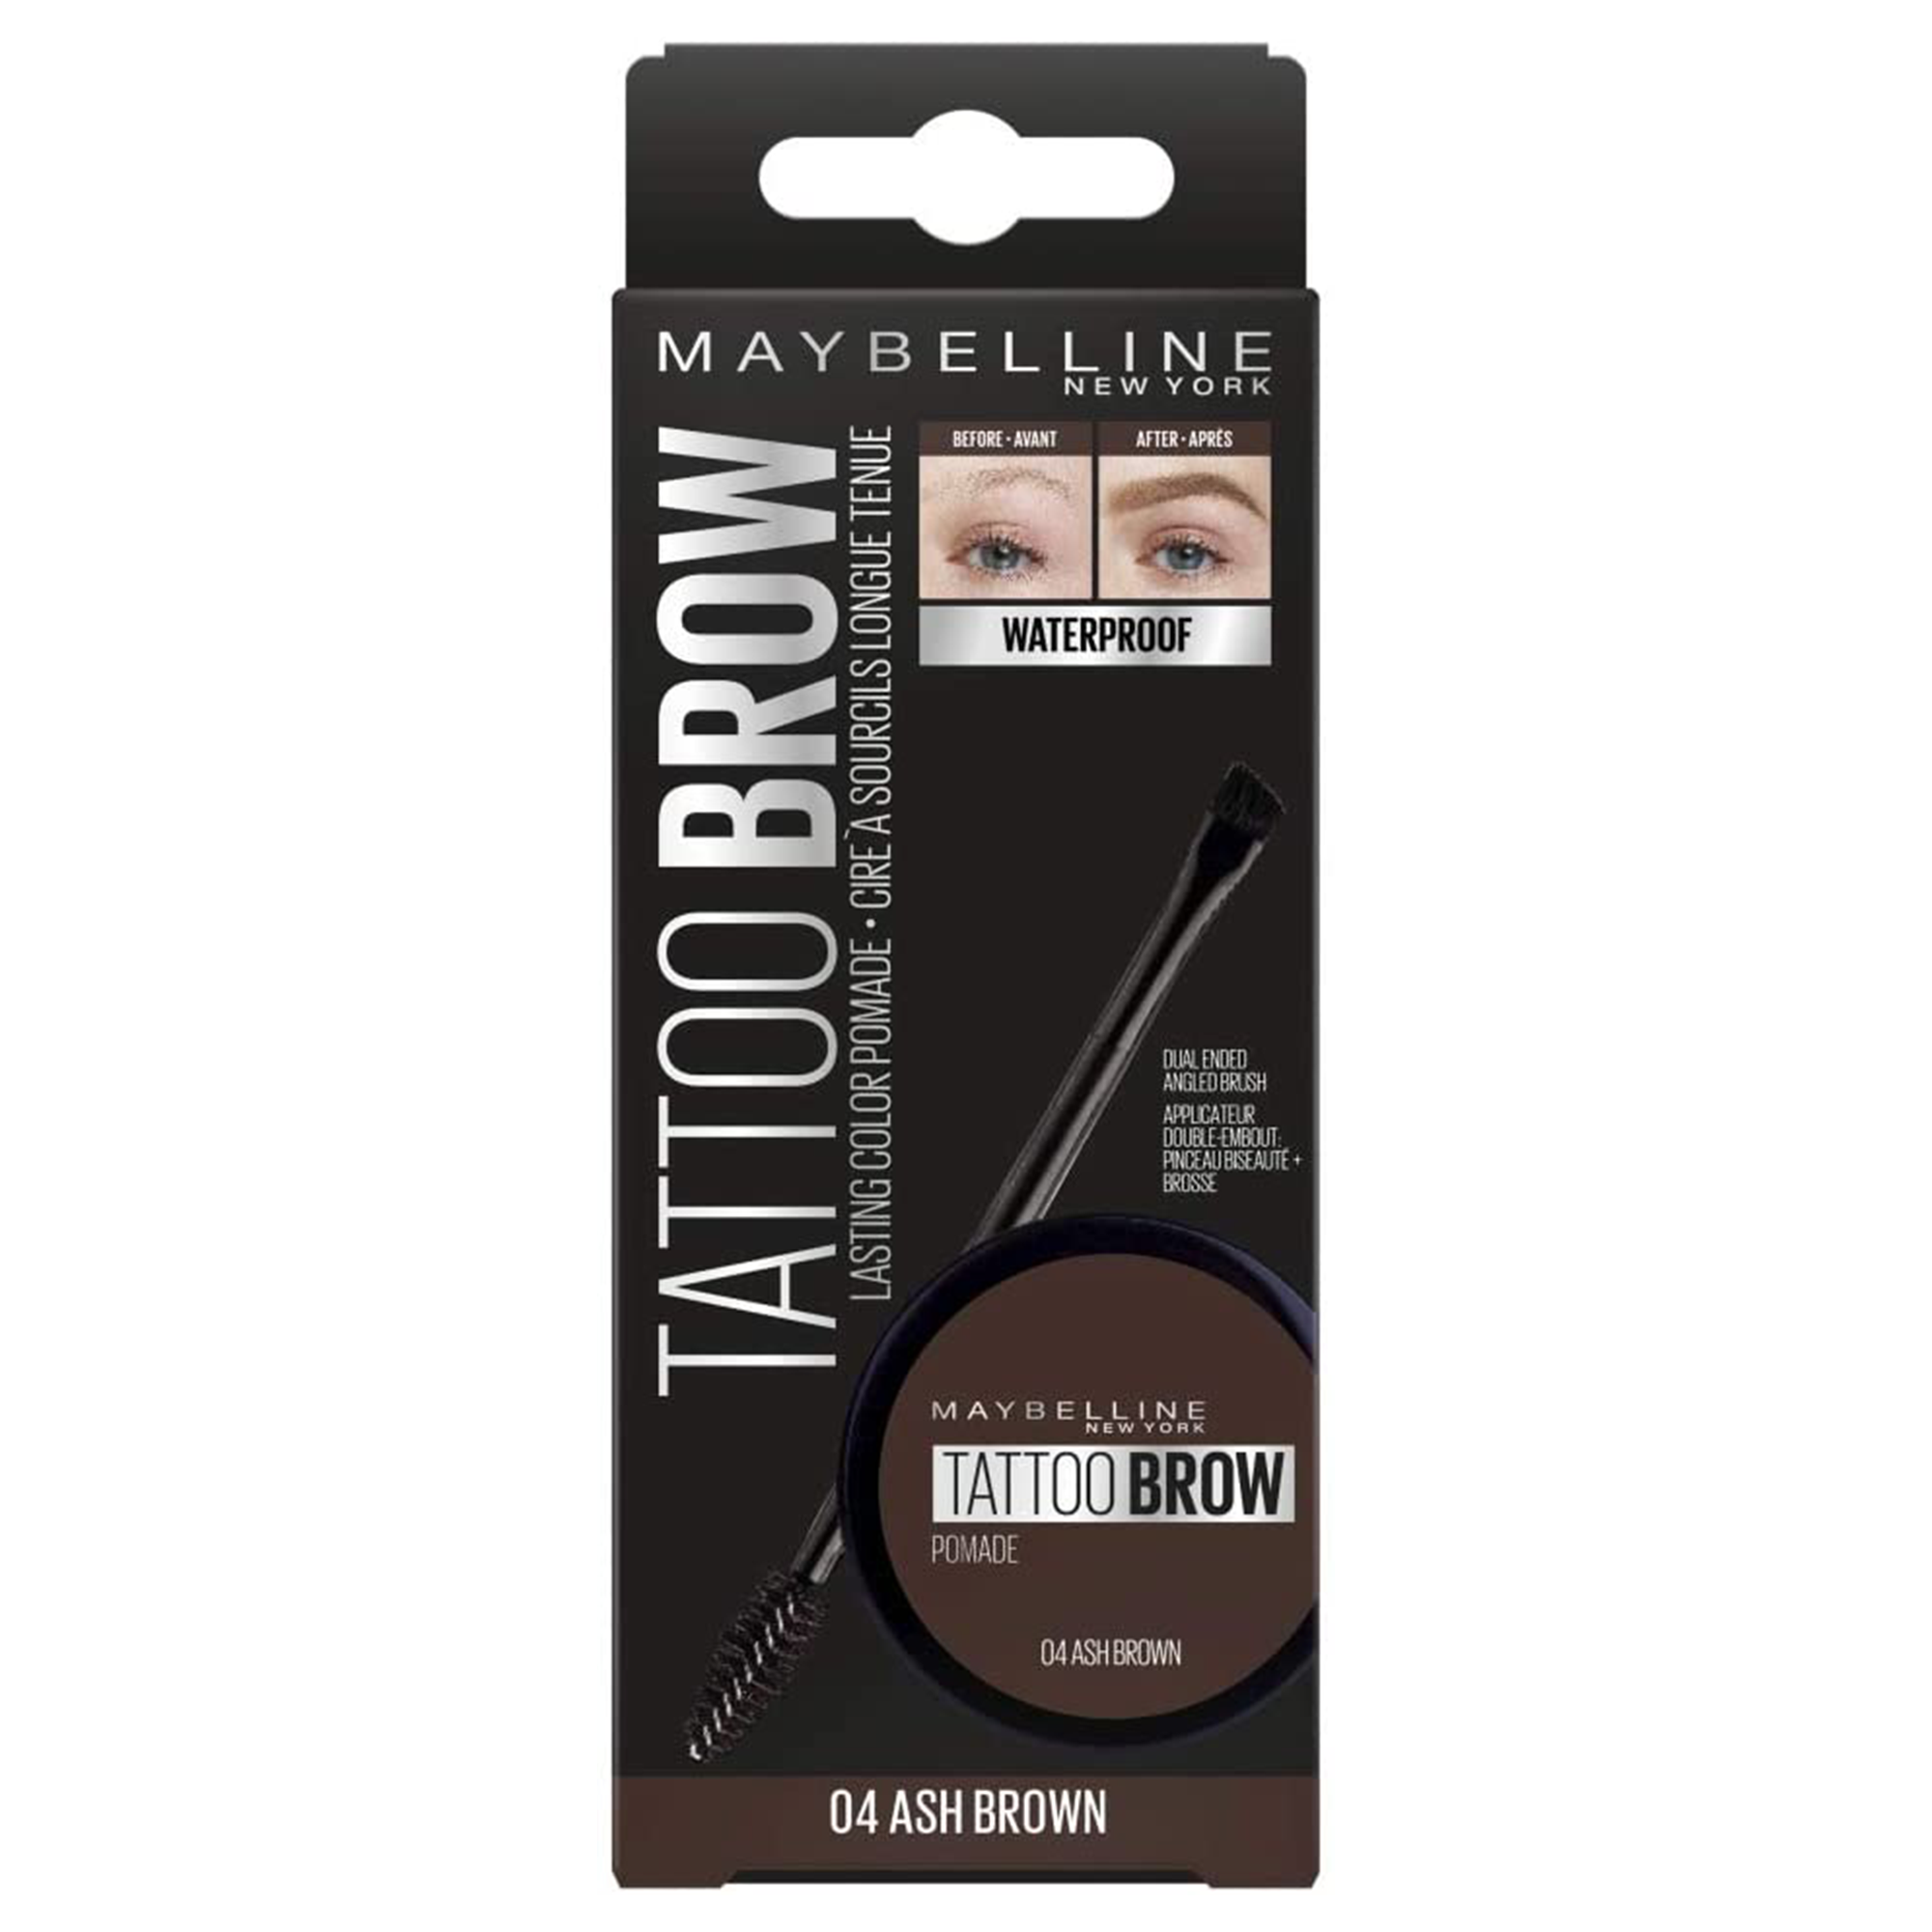 Maybelline Tattoo Brow Pomade 04 Ash Brown